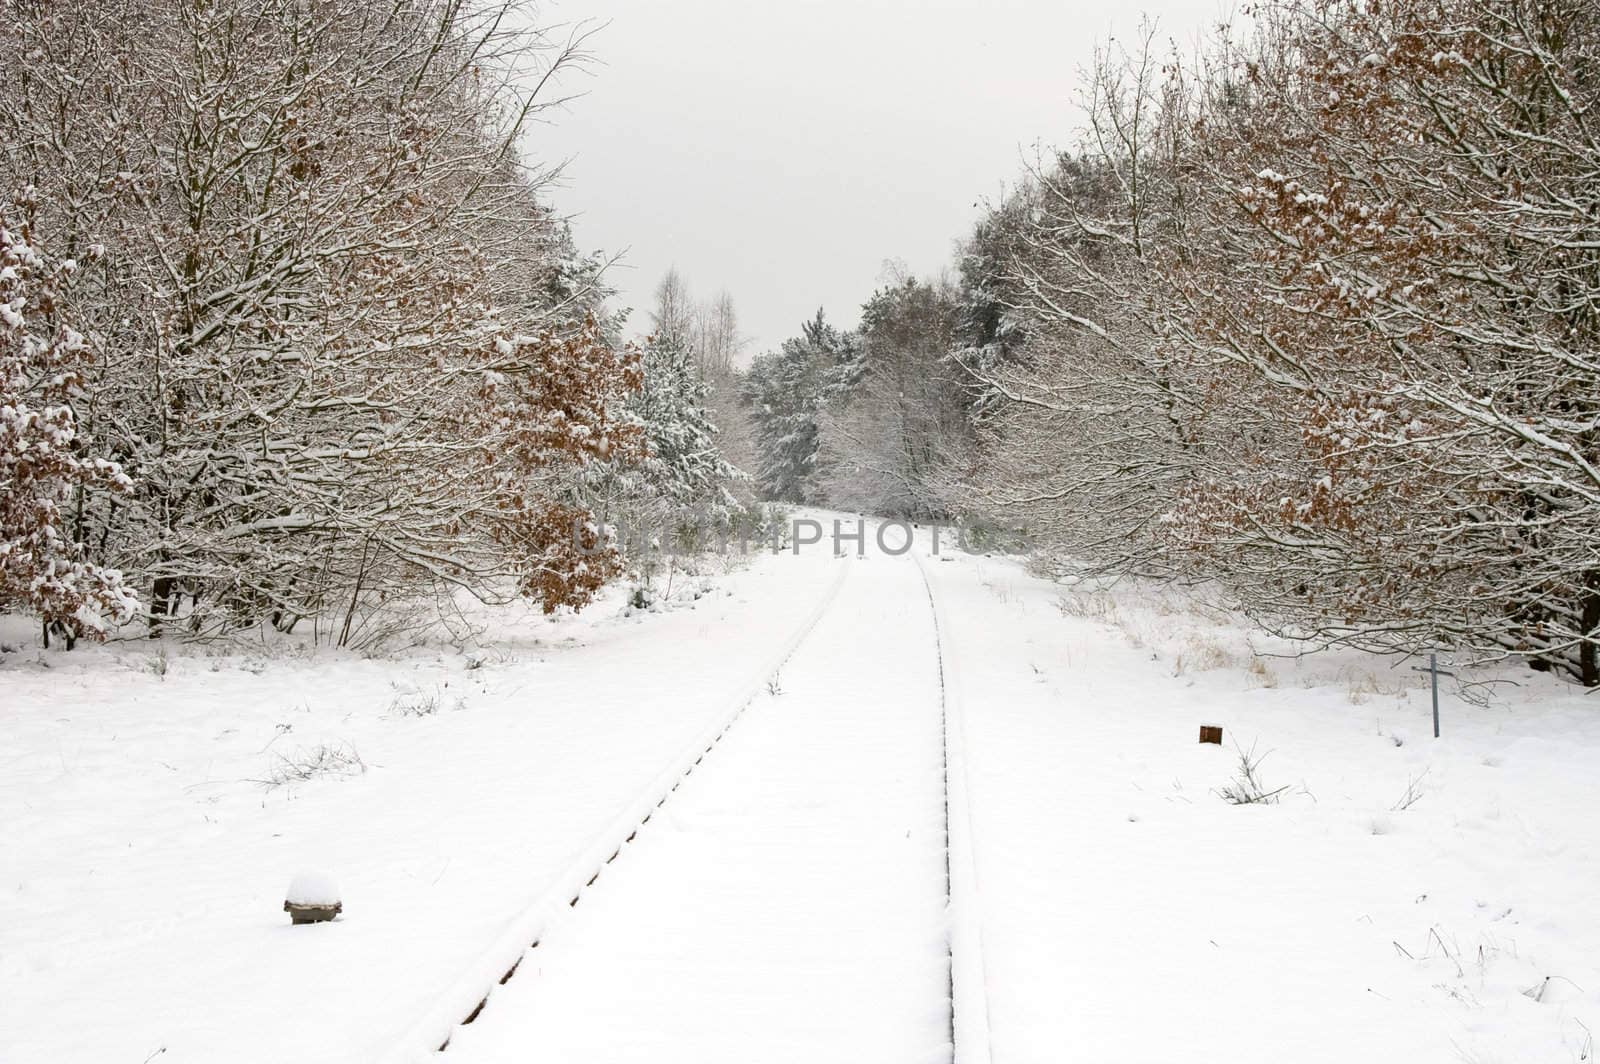 snow landscape on a railway track with forest on the side
